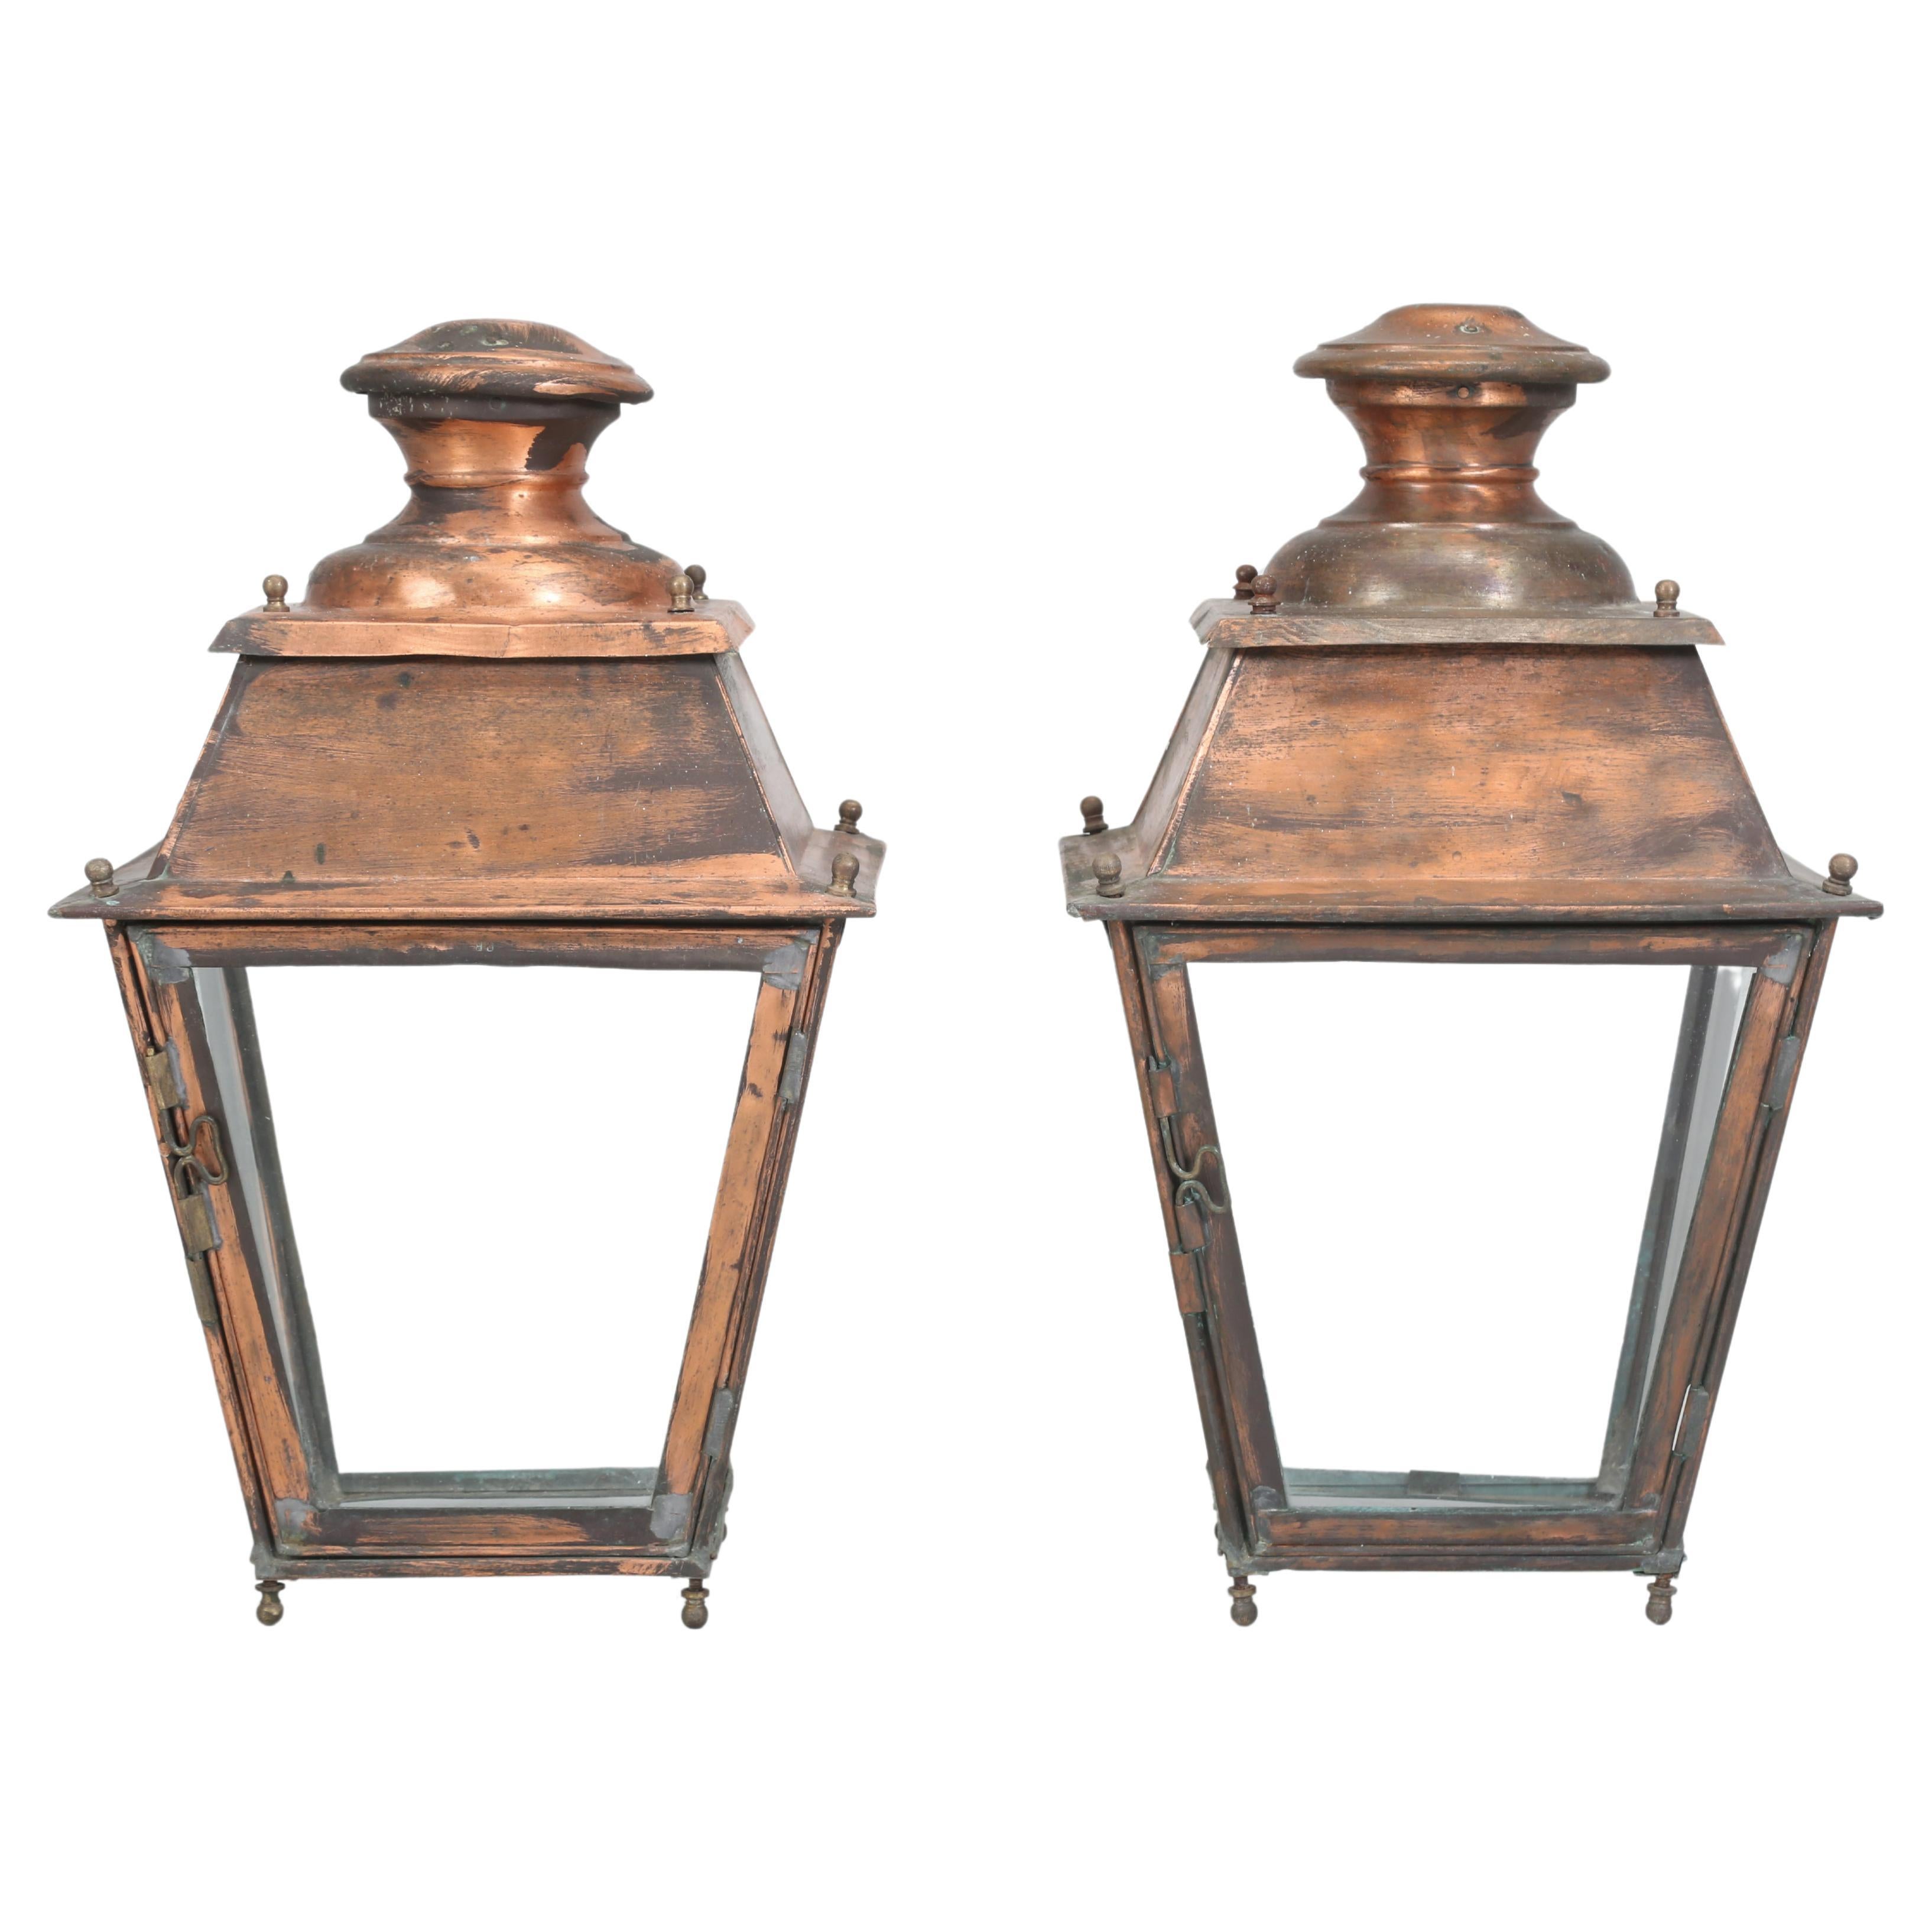 Pair of Vintage French Copper Lanterns from Toulouse France Unrestored Condition